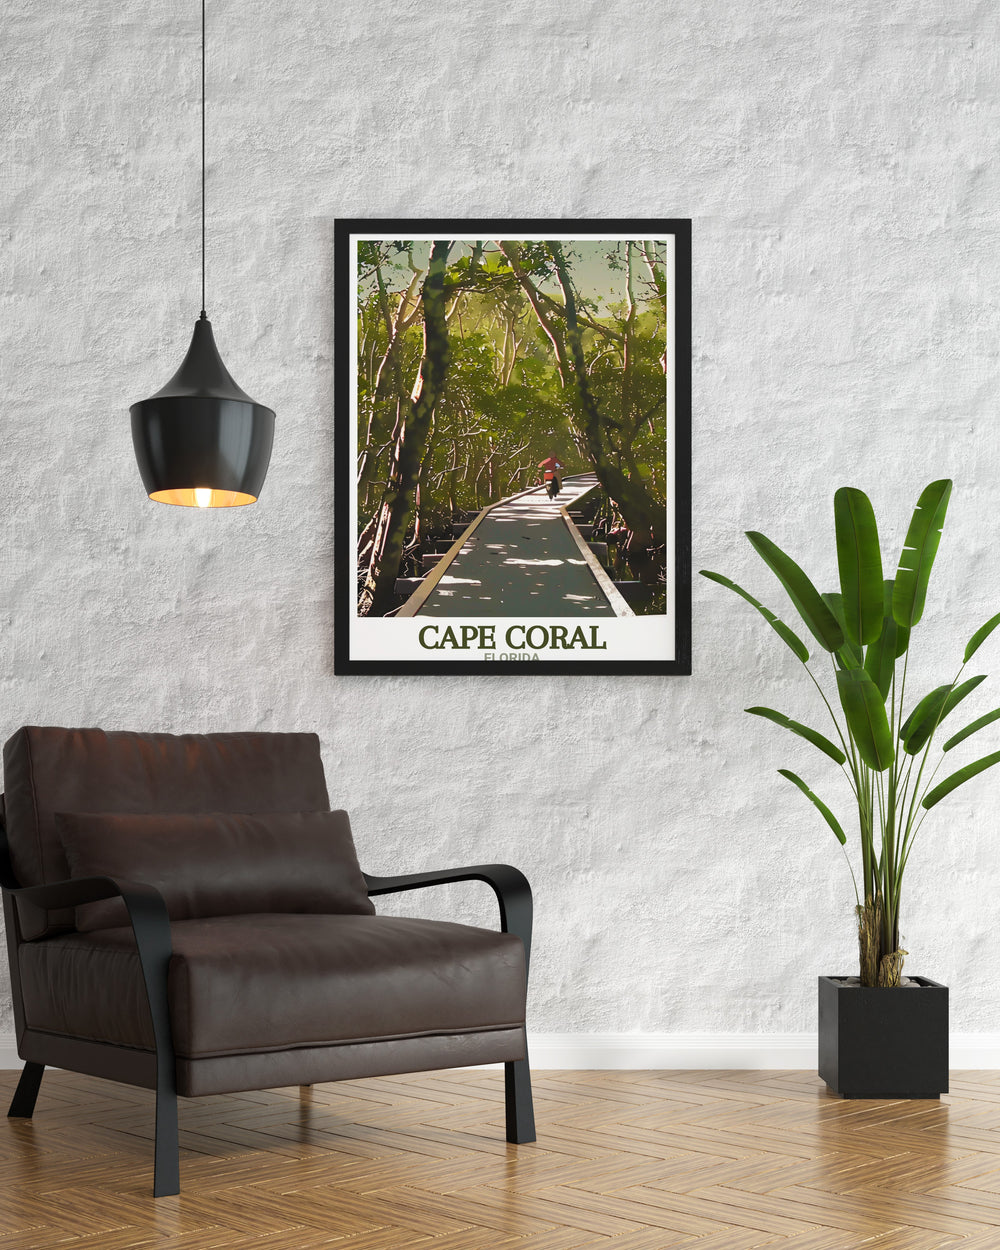 Stunning Cape Coral Wall Art depicting Four Mile Cove Ecological Preserve brings a touch of Floridas scenic beauty to your home decor detailed artwork perfect for travel lovers and those who cherish serene natural landscapes.